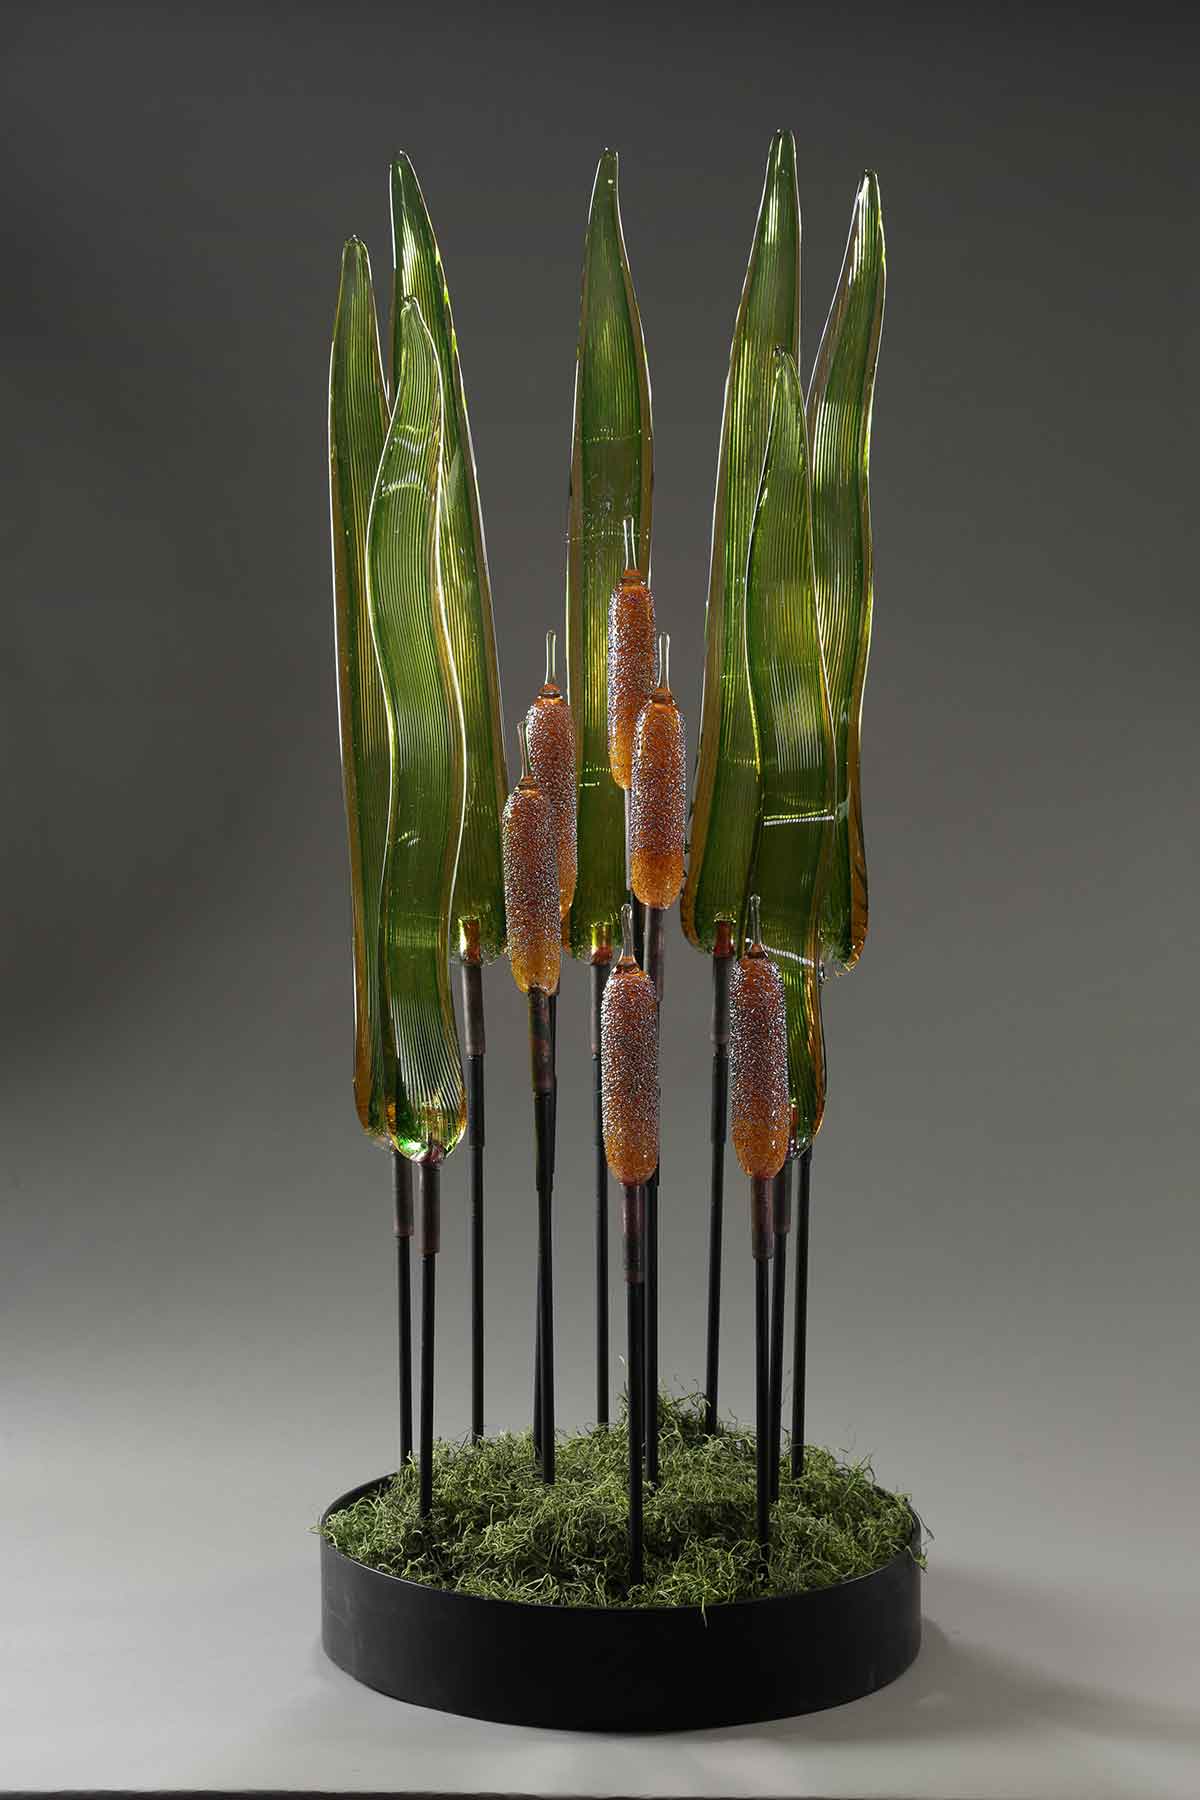 Cattail Arrangement with Cattail Leaves 13 pt